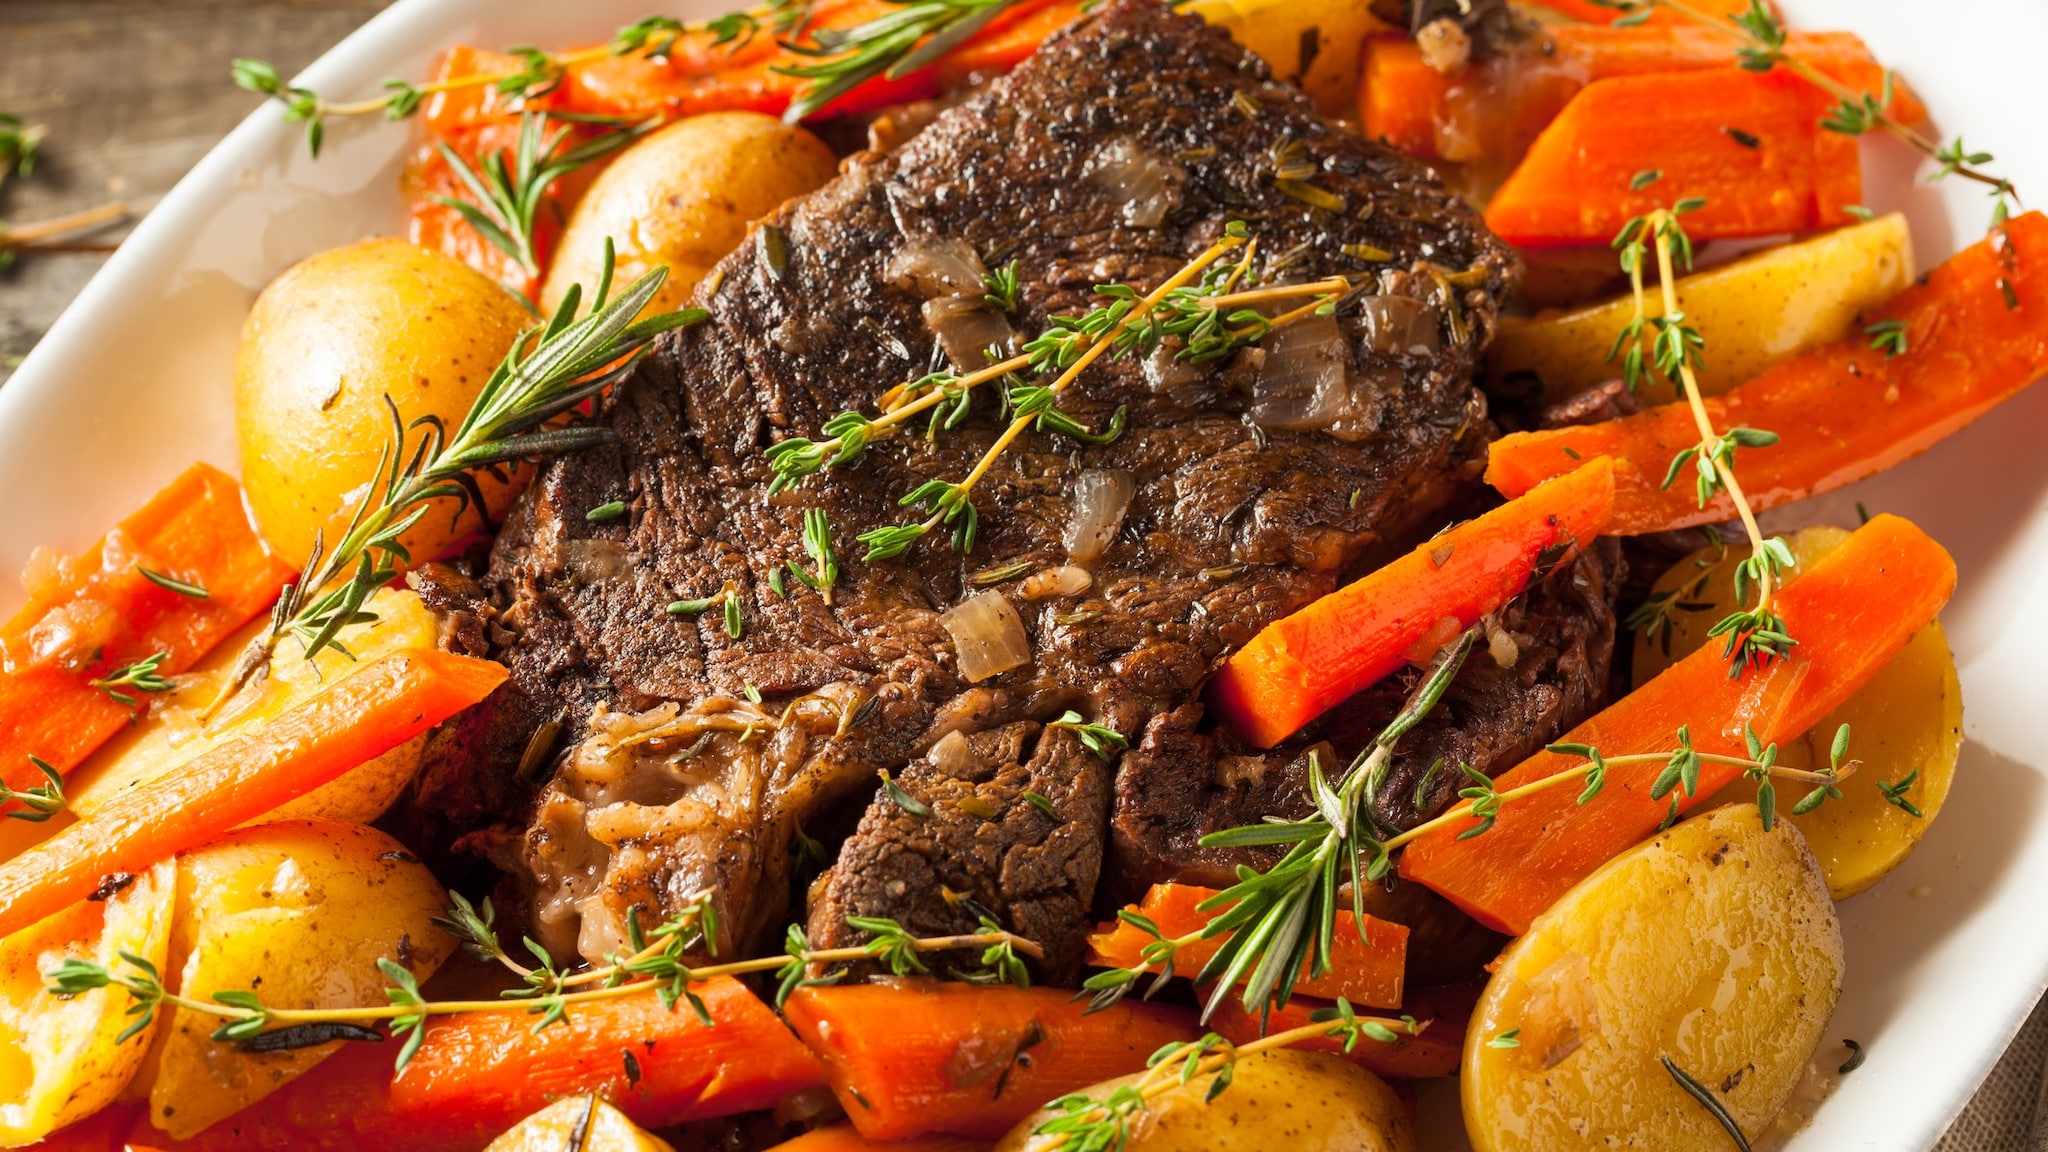 A dish of cooked roast beef, carrots, and potatoes.